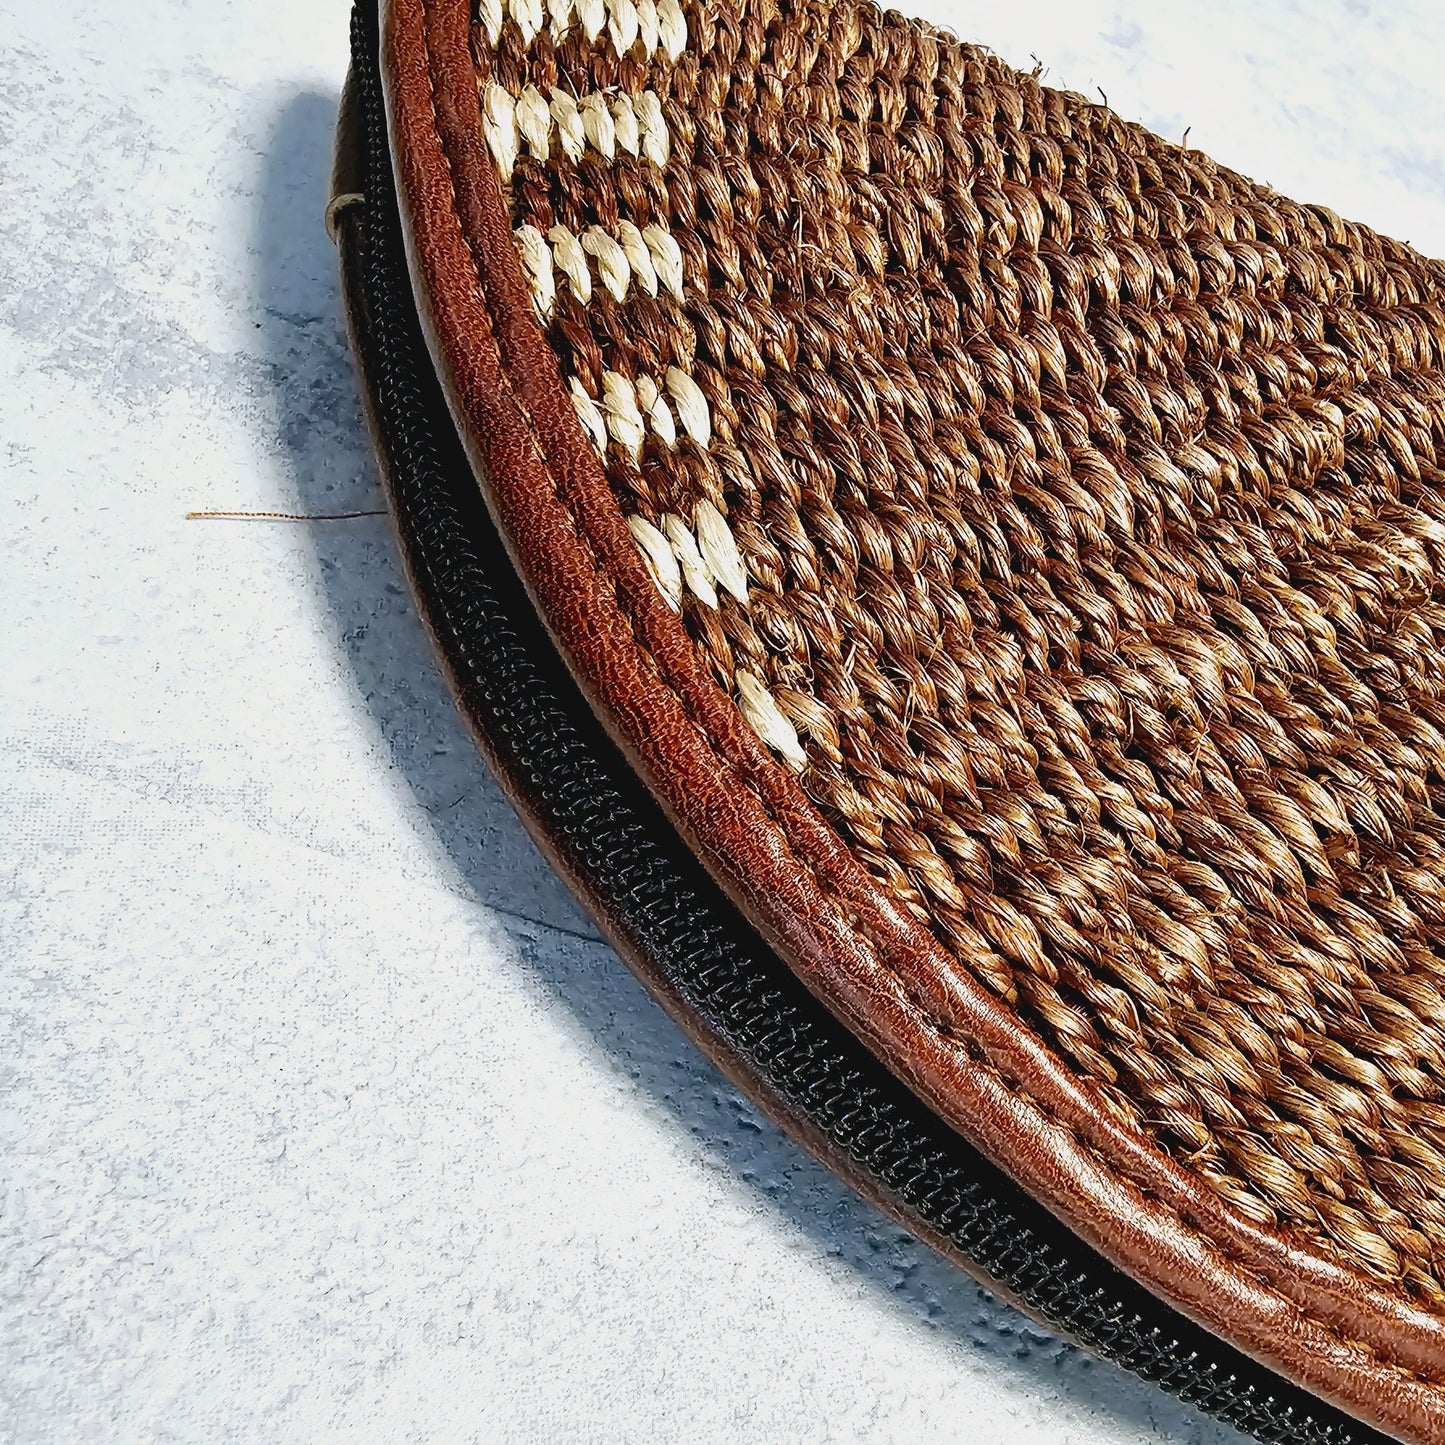 Handwoven Sisal Clutch Purse, Lined and Wrist Handle And Zipper